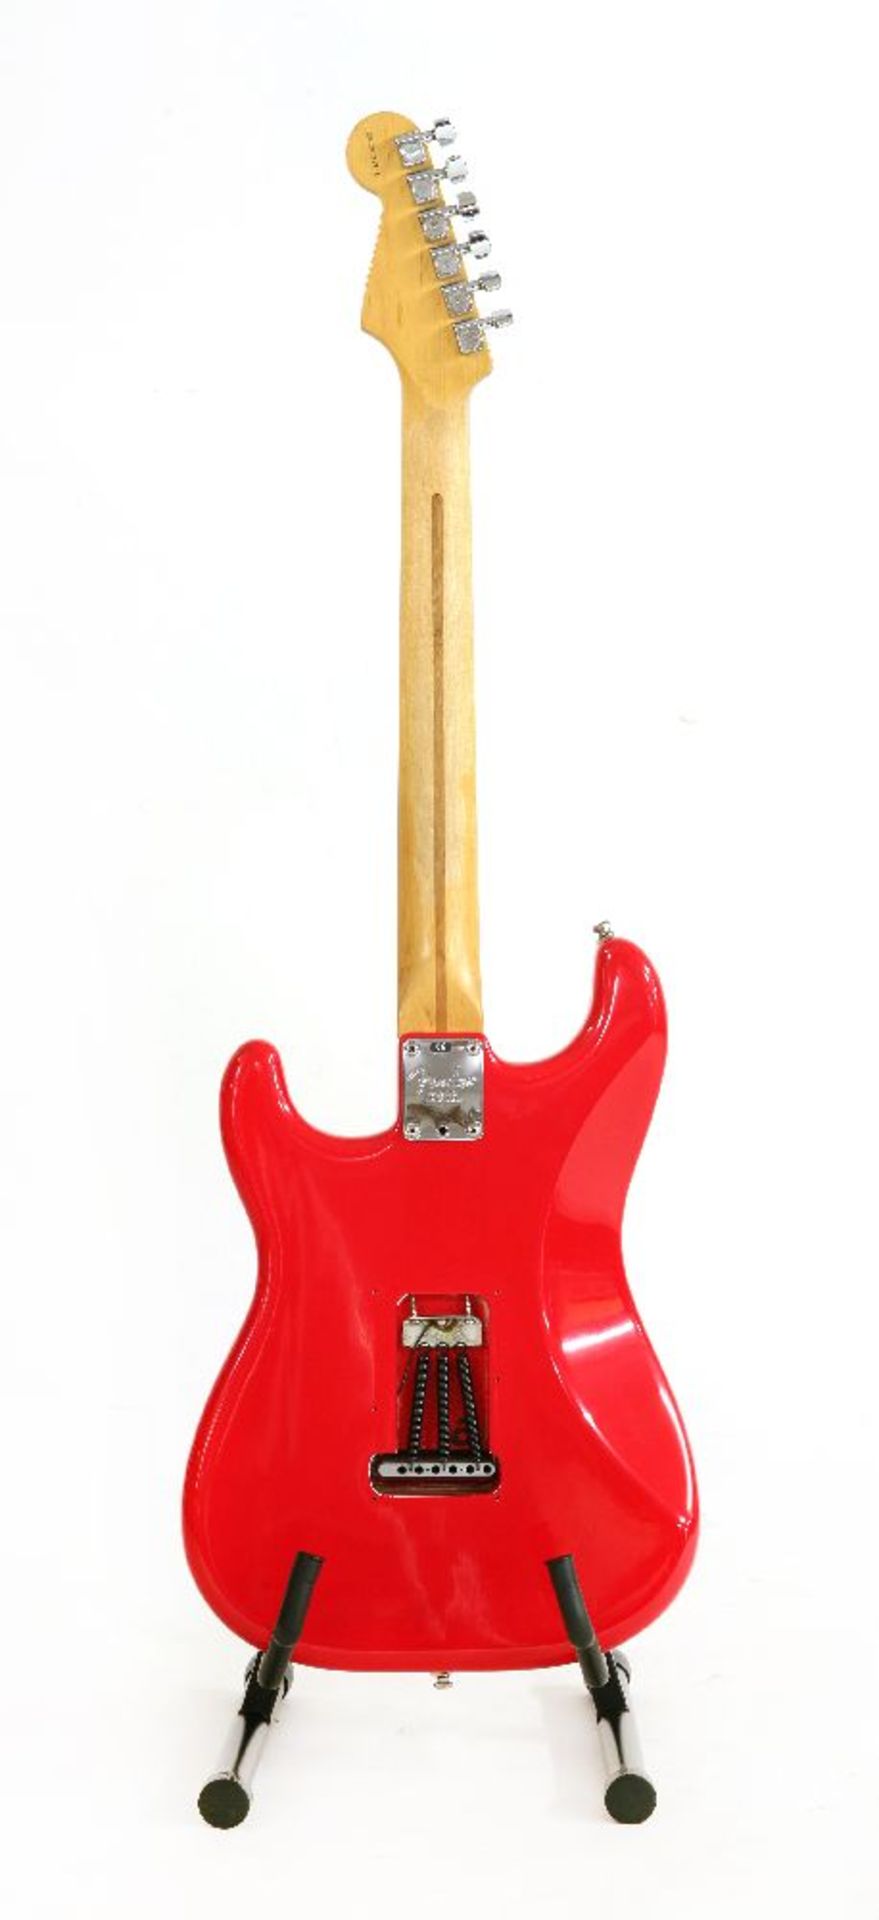 A 2000 Fender Stratocaster electric guitar,made in the USA, serial no. Z01xxxx4, complete with a - Image 2 of 2